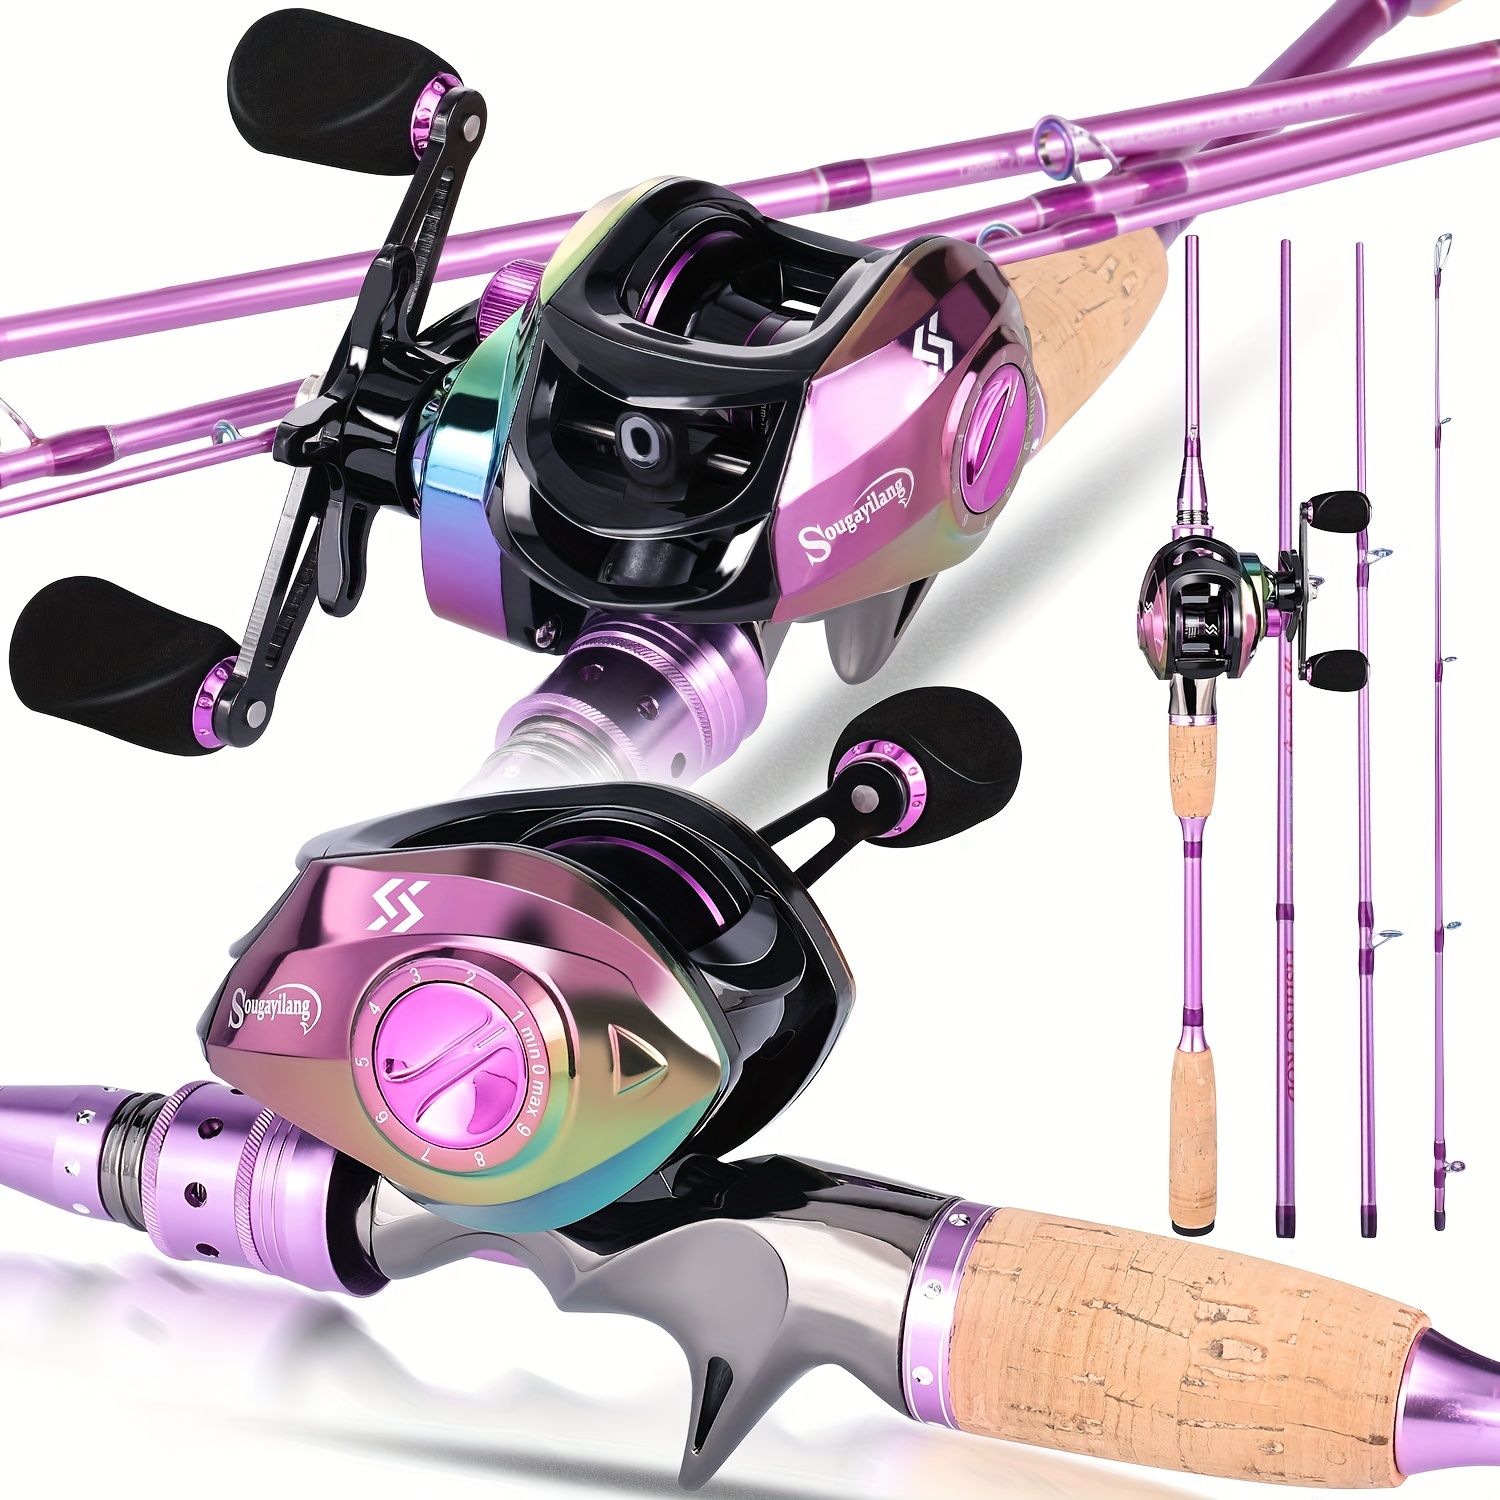 4 Sections Fishing Combos, 82.68inch/6.89FT Carbon Fiber Rod And 19+1 BB  7.2:1 Gear Ratio Baitcasting Fishing Reel, Fishing Supplies